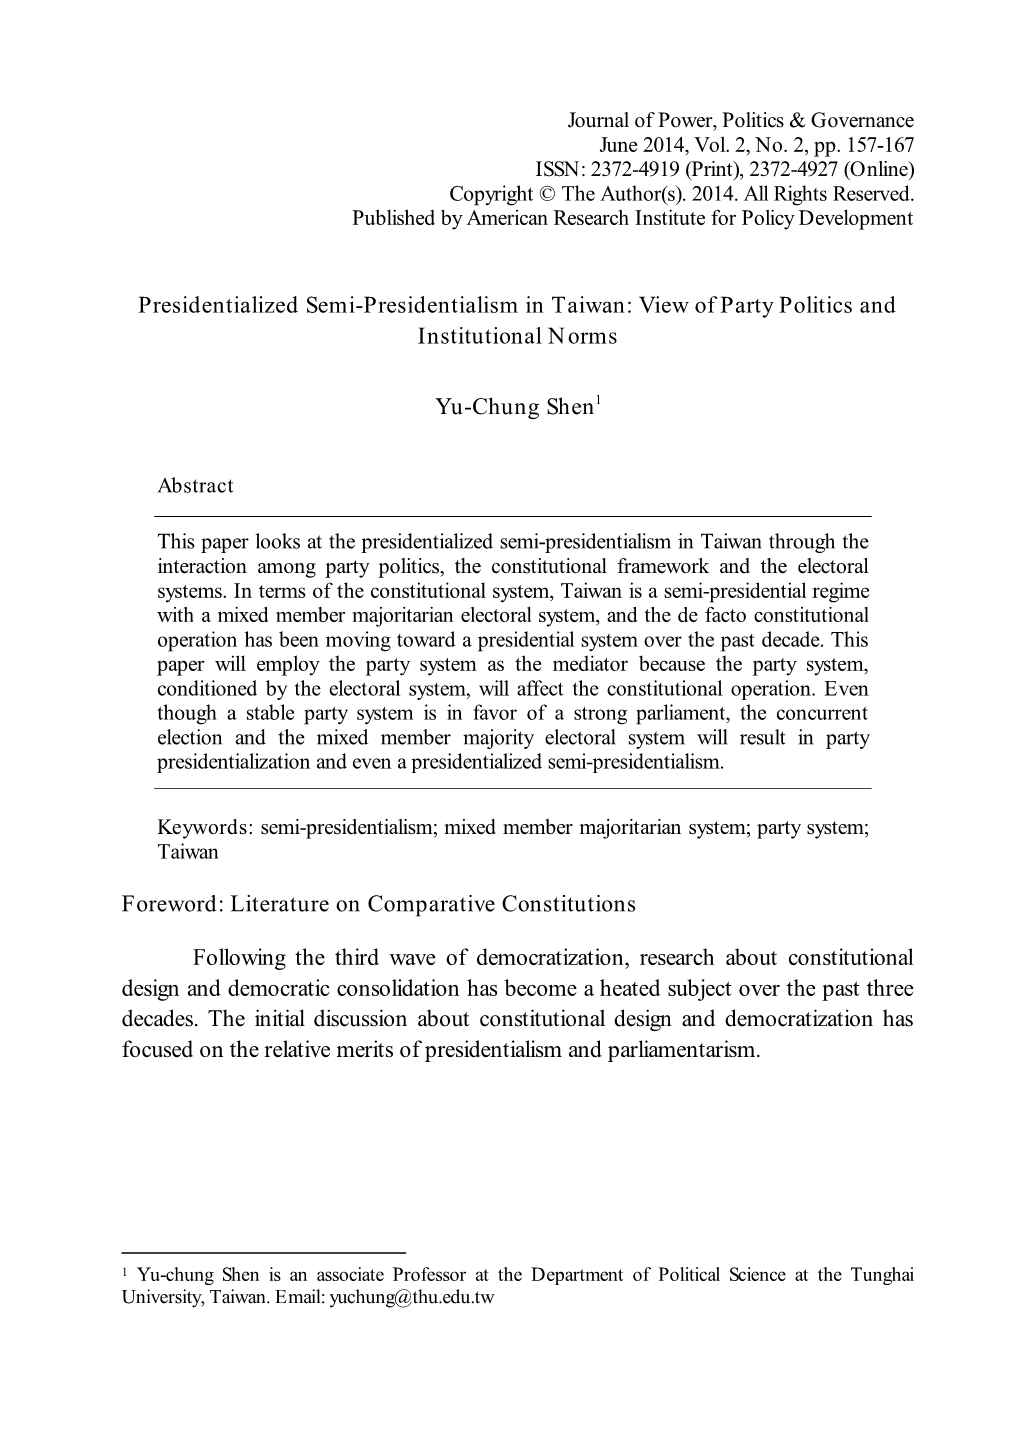 Presidentialized Semi-Presidentialism in Taiwan: View of Party Politics and Institutional Norms